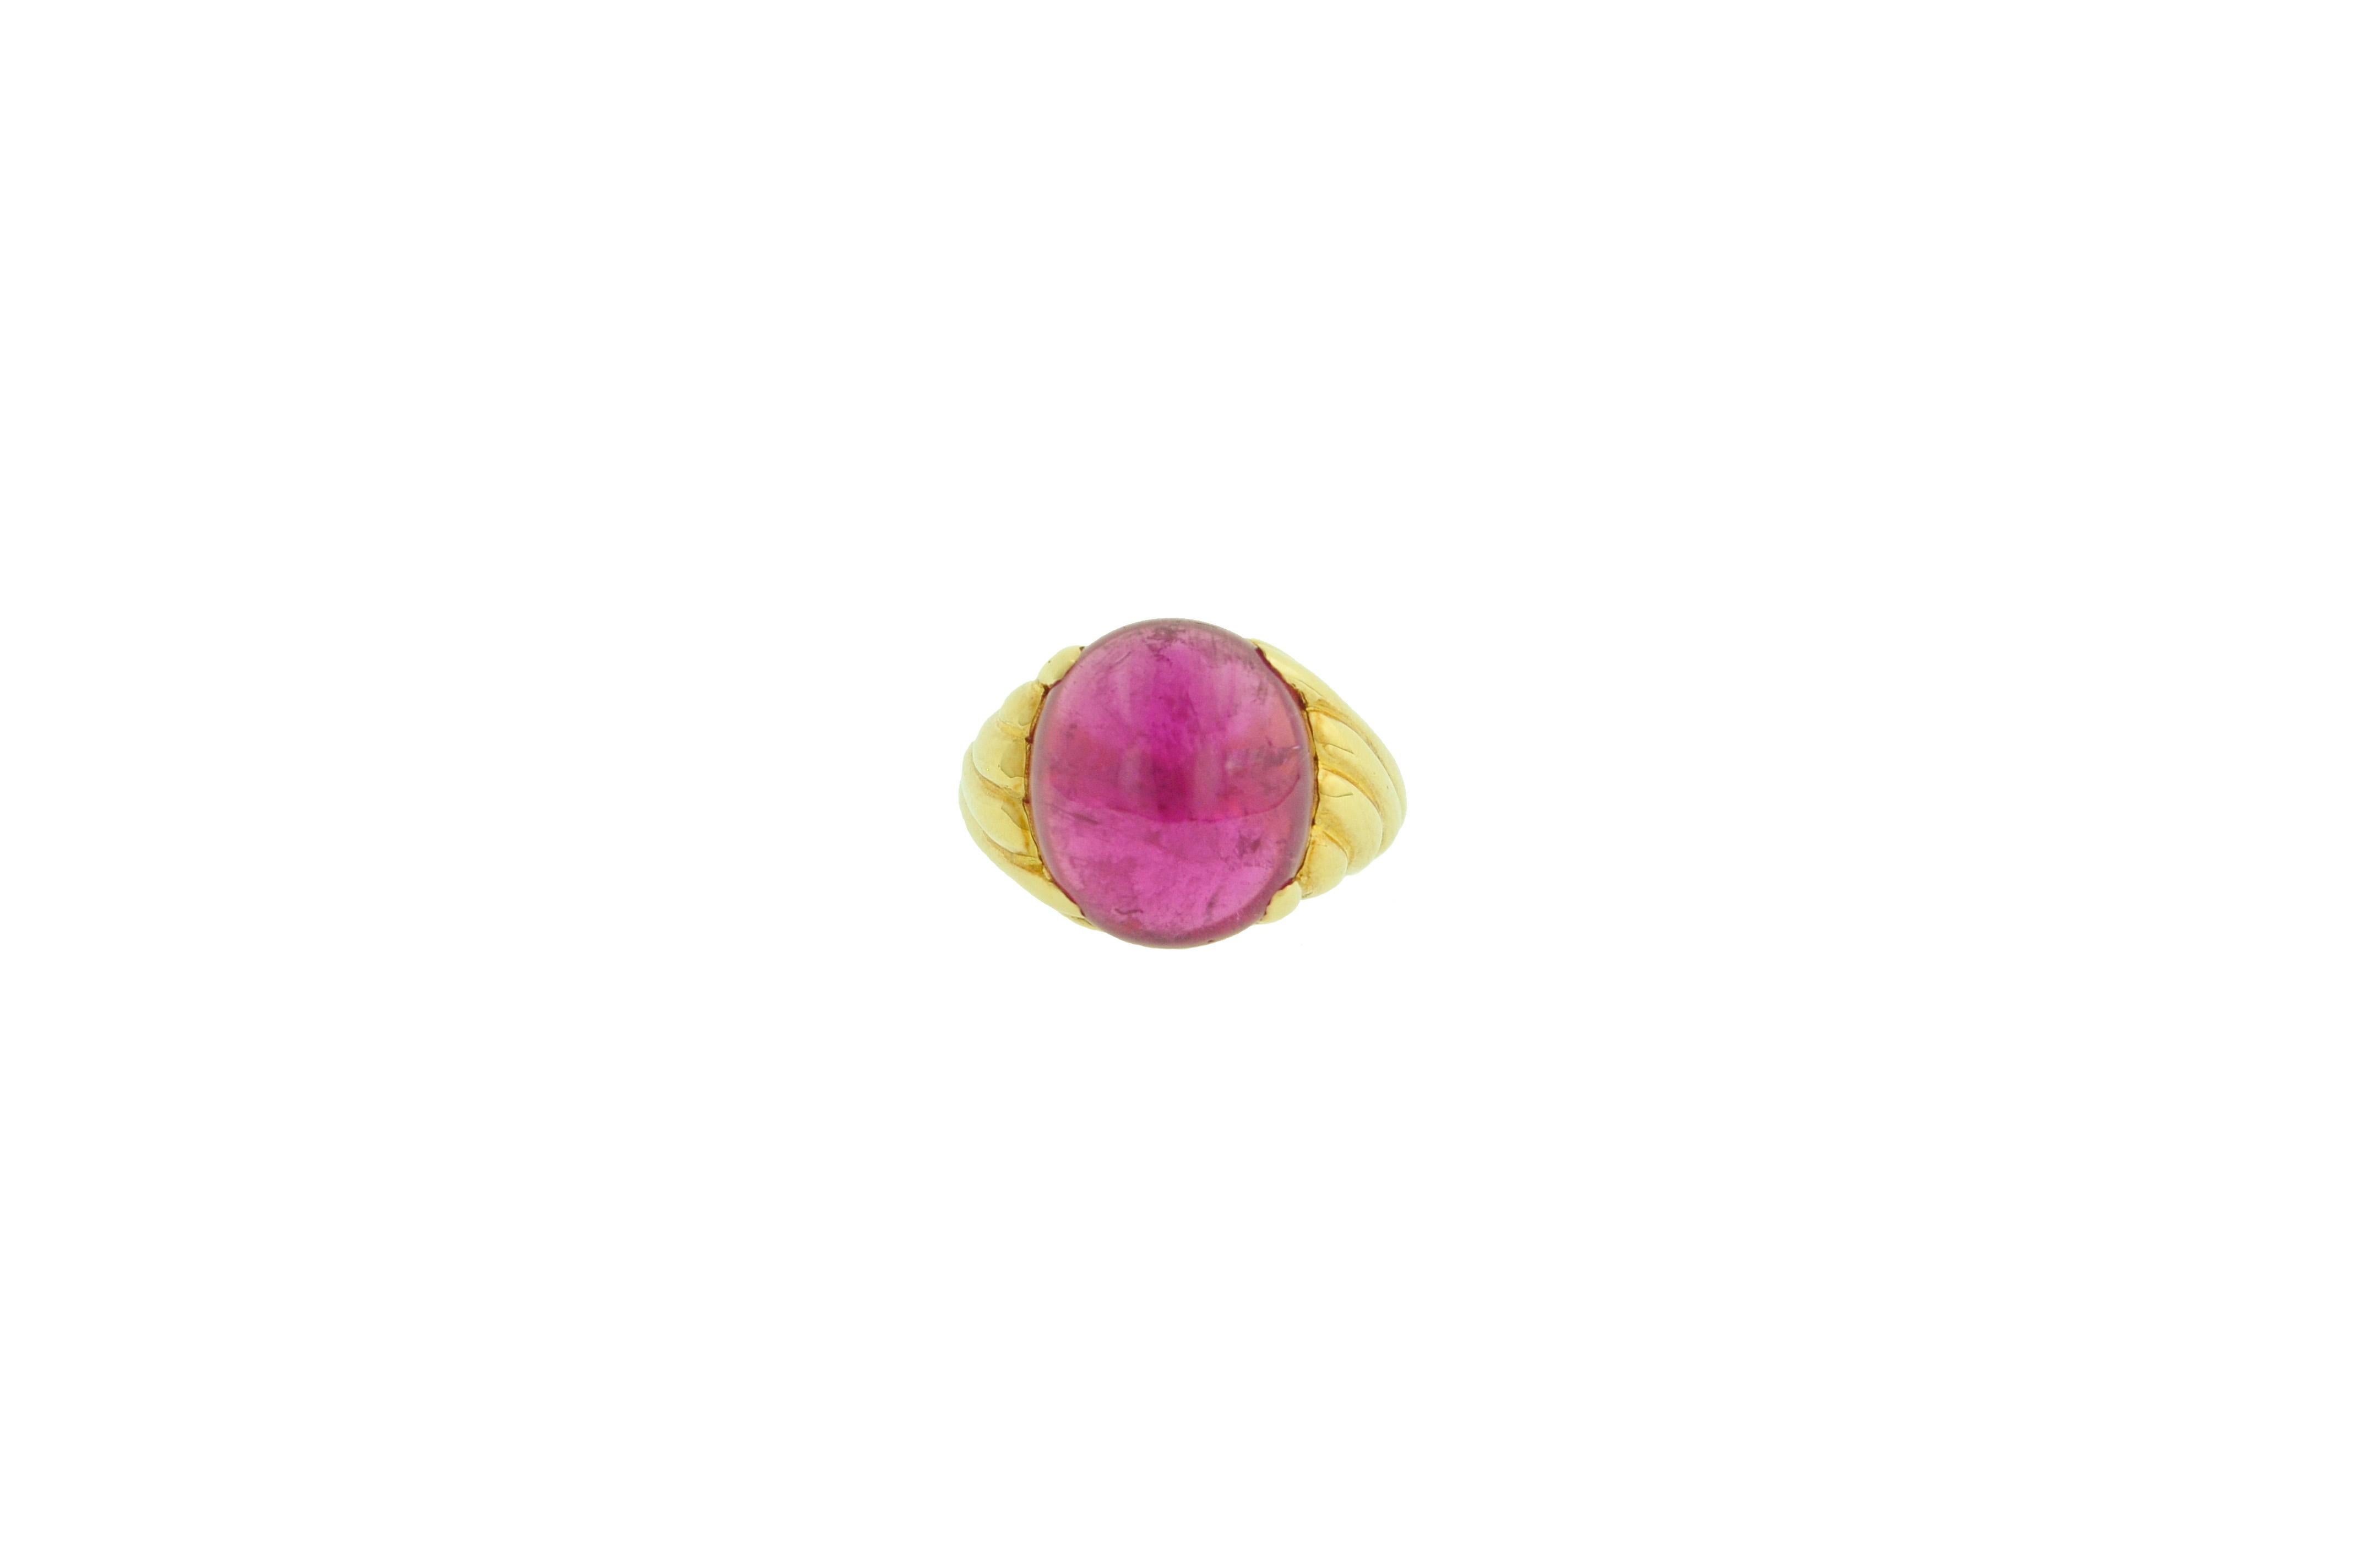 Crafted in 18 Karat Yellow Gold.

The cabochon rubellite weighs 12.87 carats.

Ringe size: 7 3/4